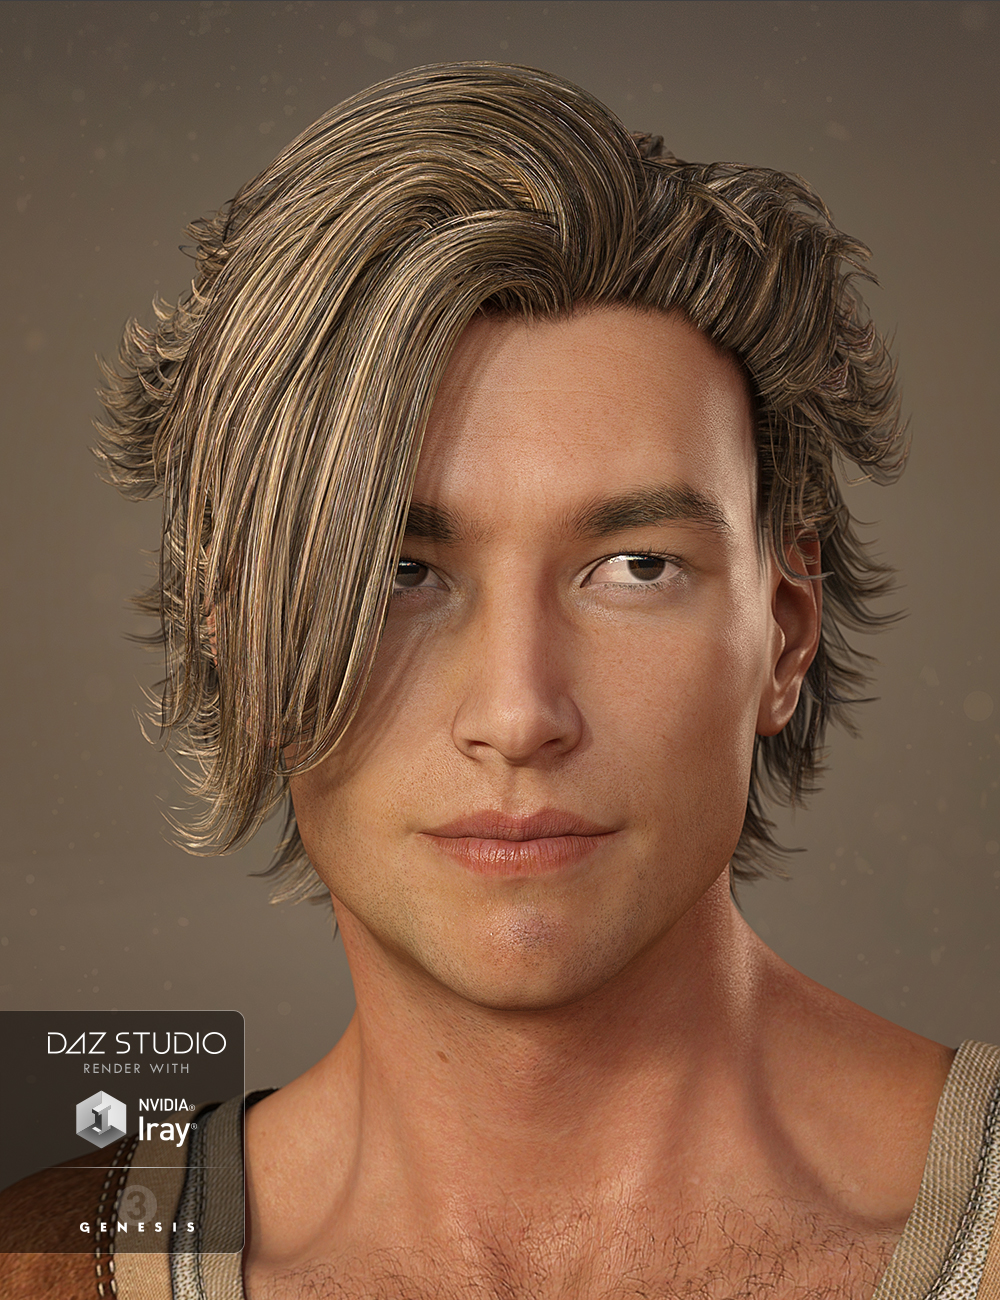 Mathew Hair for Genesis 3 Male(s) and Genesis 2 Male(s)